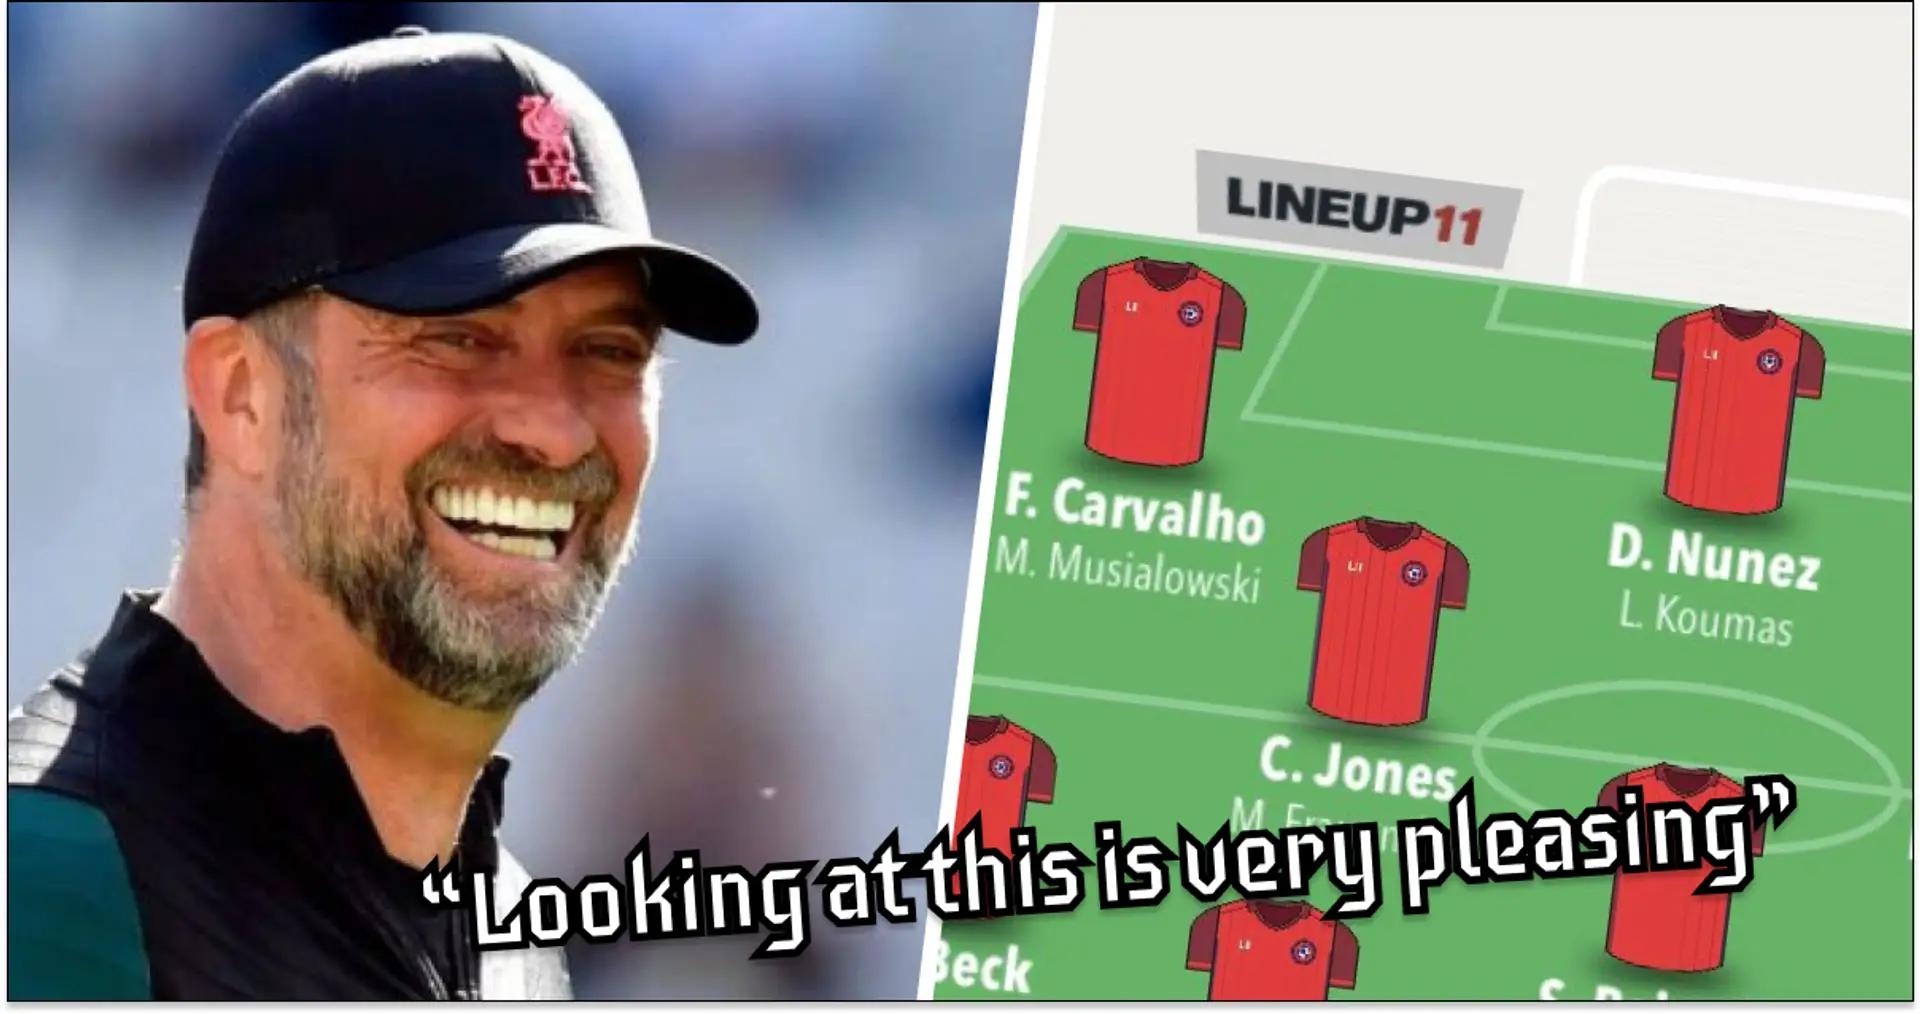 'We have a bright future': Liverpool fan draws U23 XI and it's a really good side